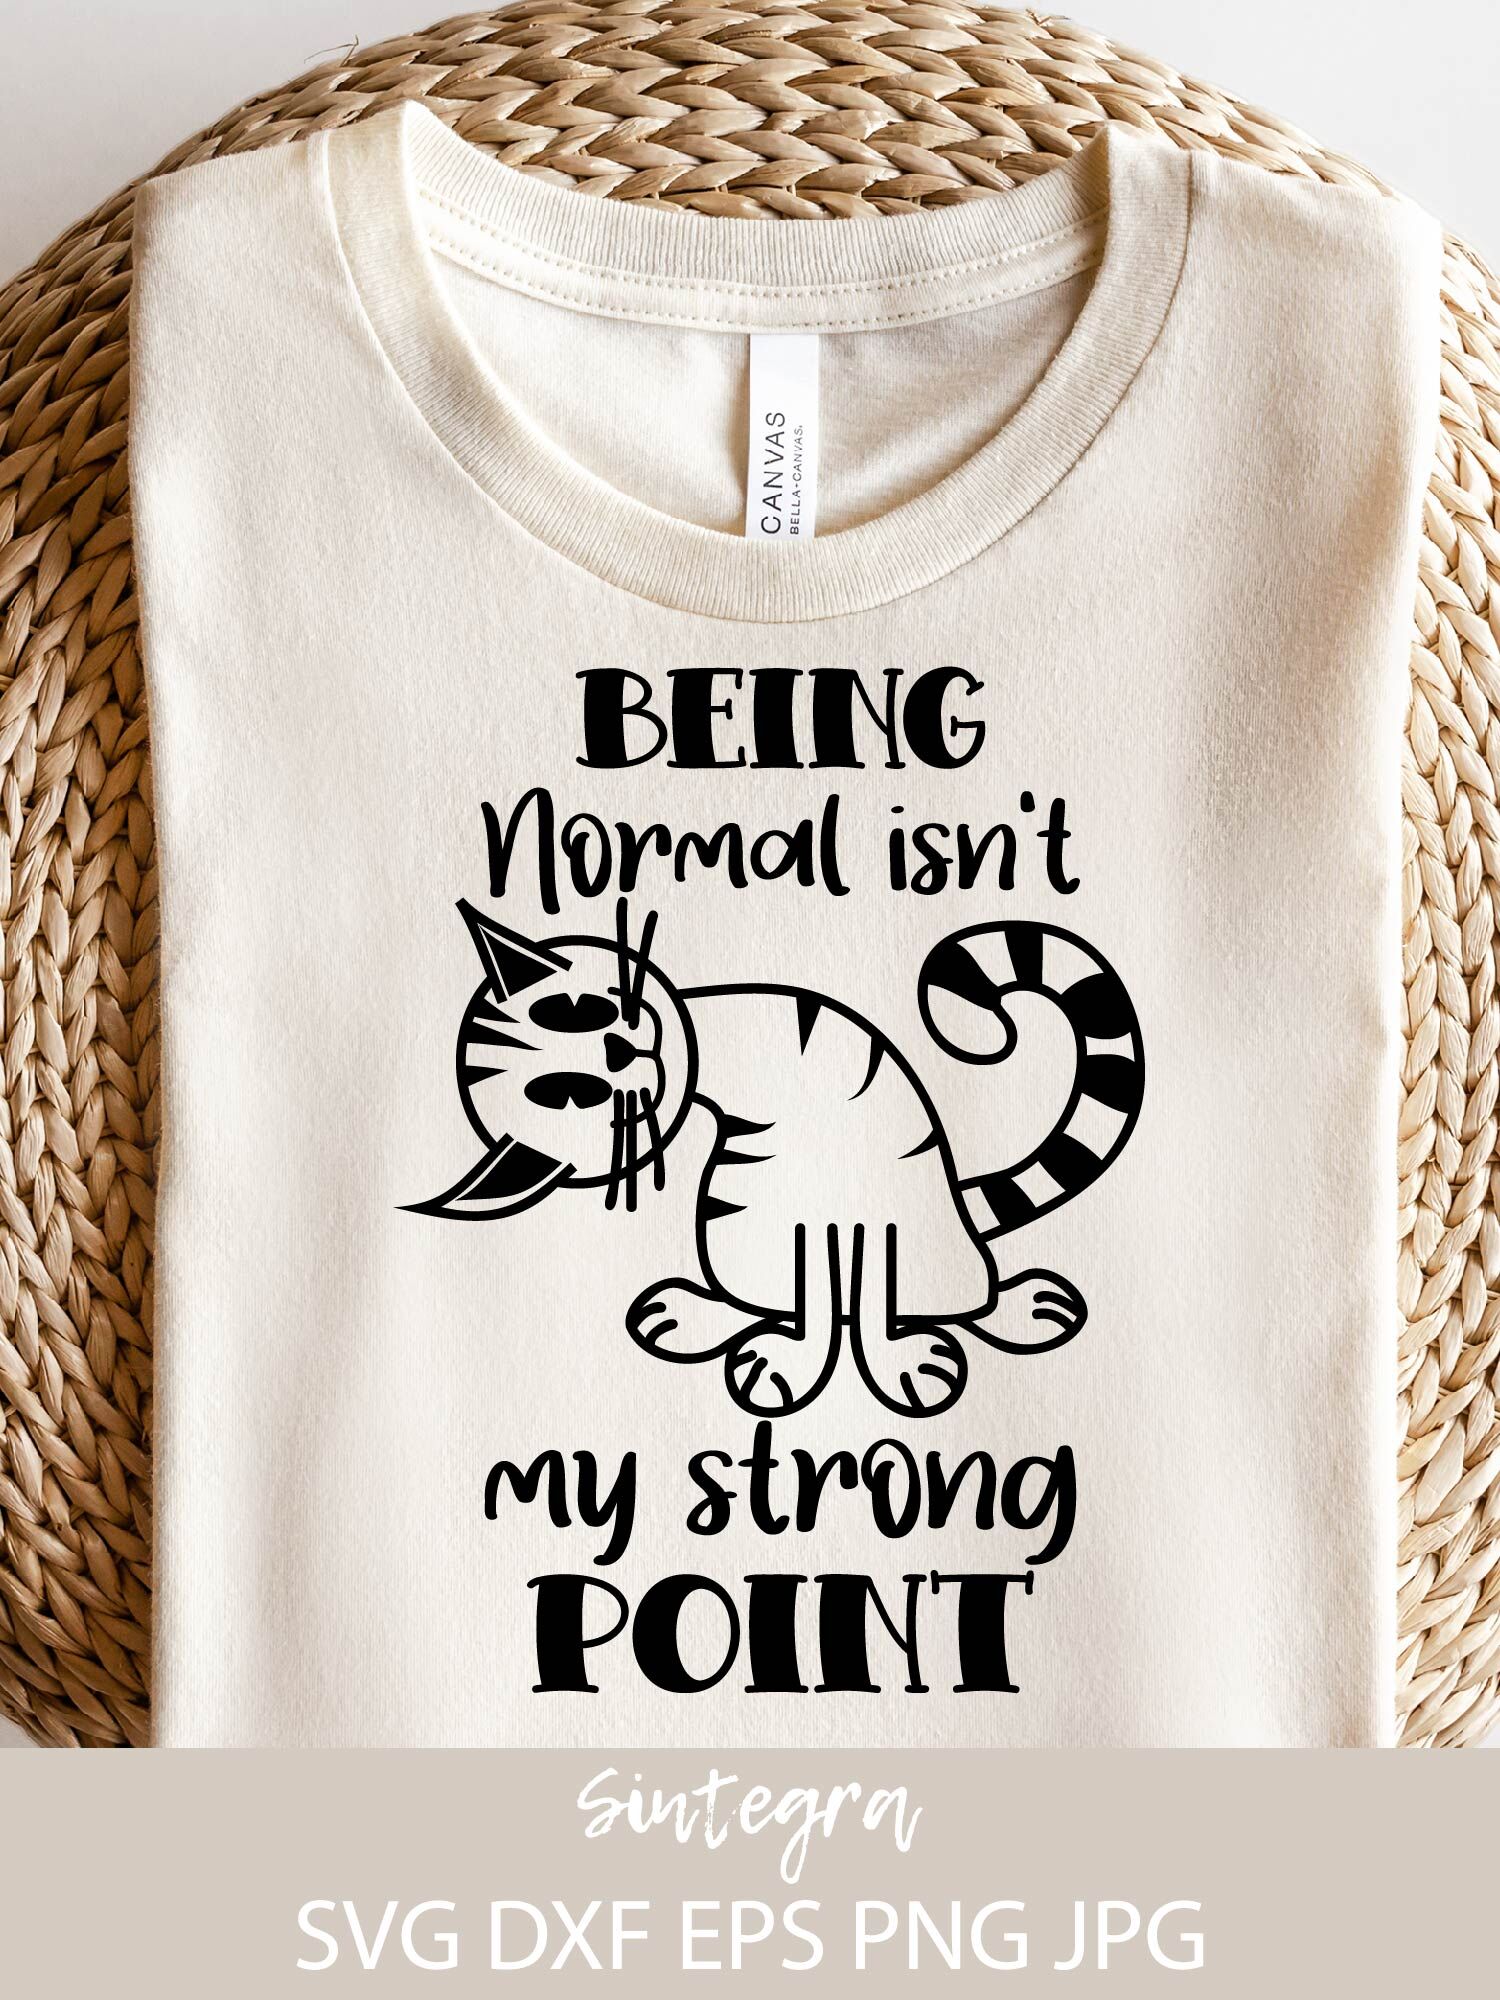 Being Normal Isn't My Strong Point, Funny Cat Animal SVG By Sintegra ...